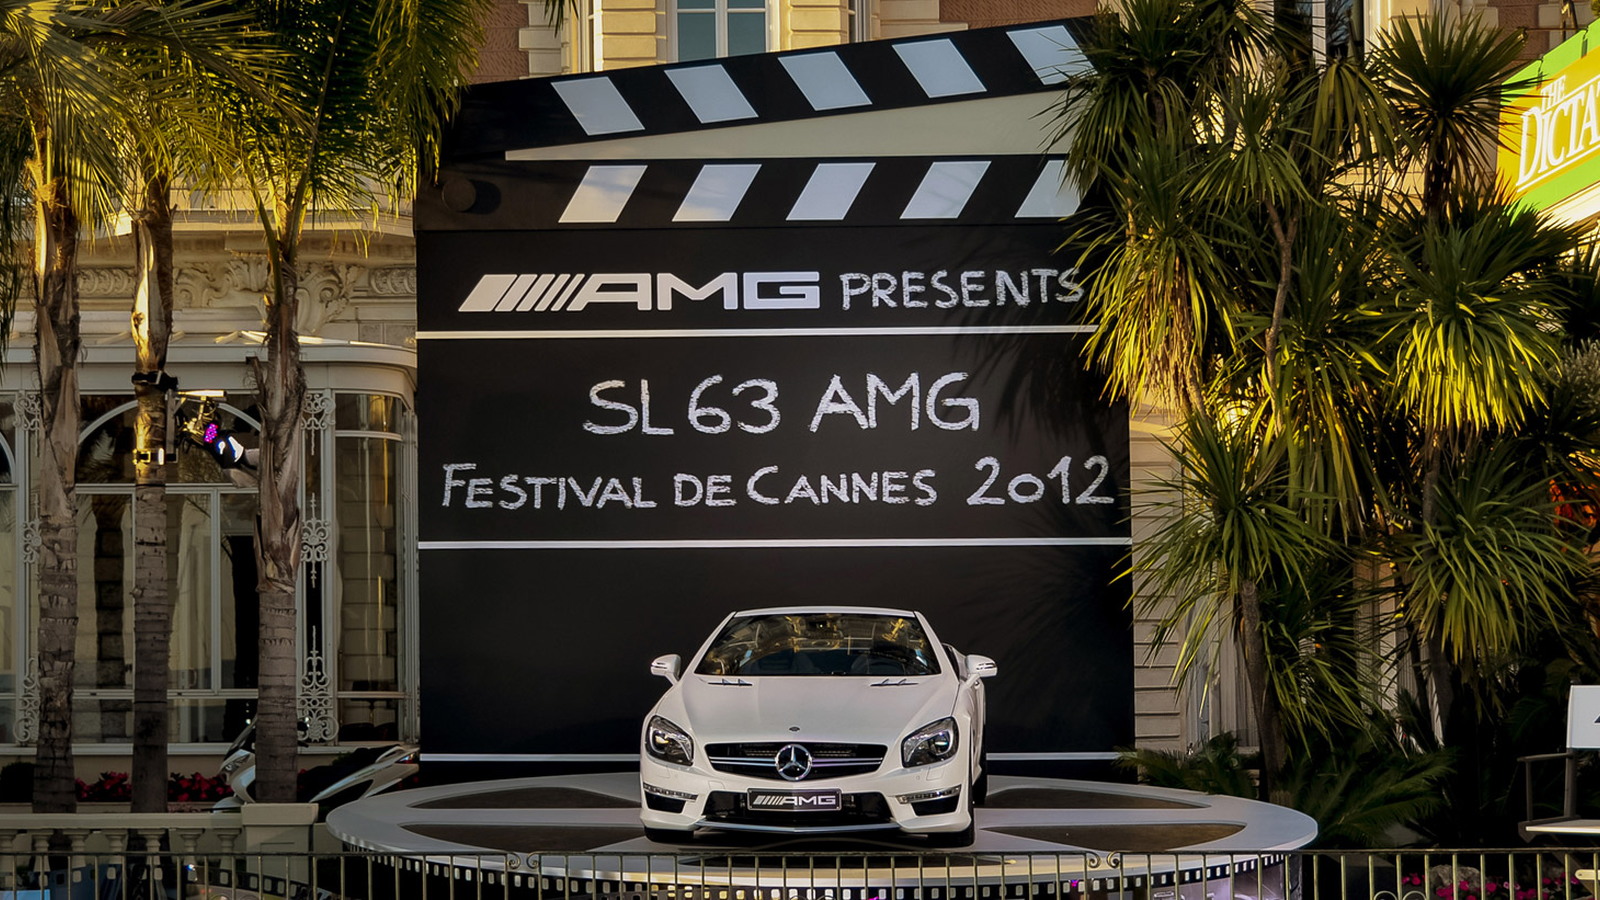 Mercedes-Benz gold shuttle service at the 2012 Cannes Film Festival